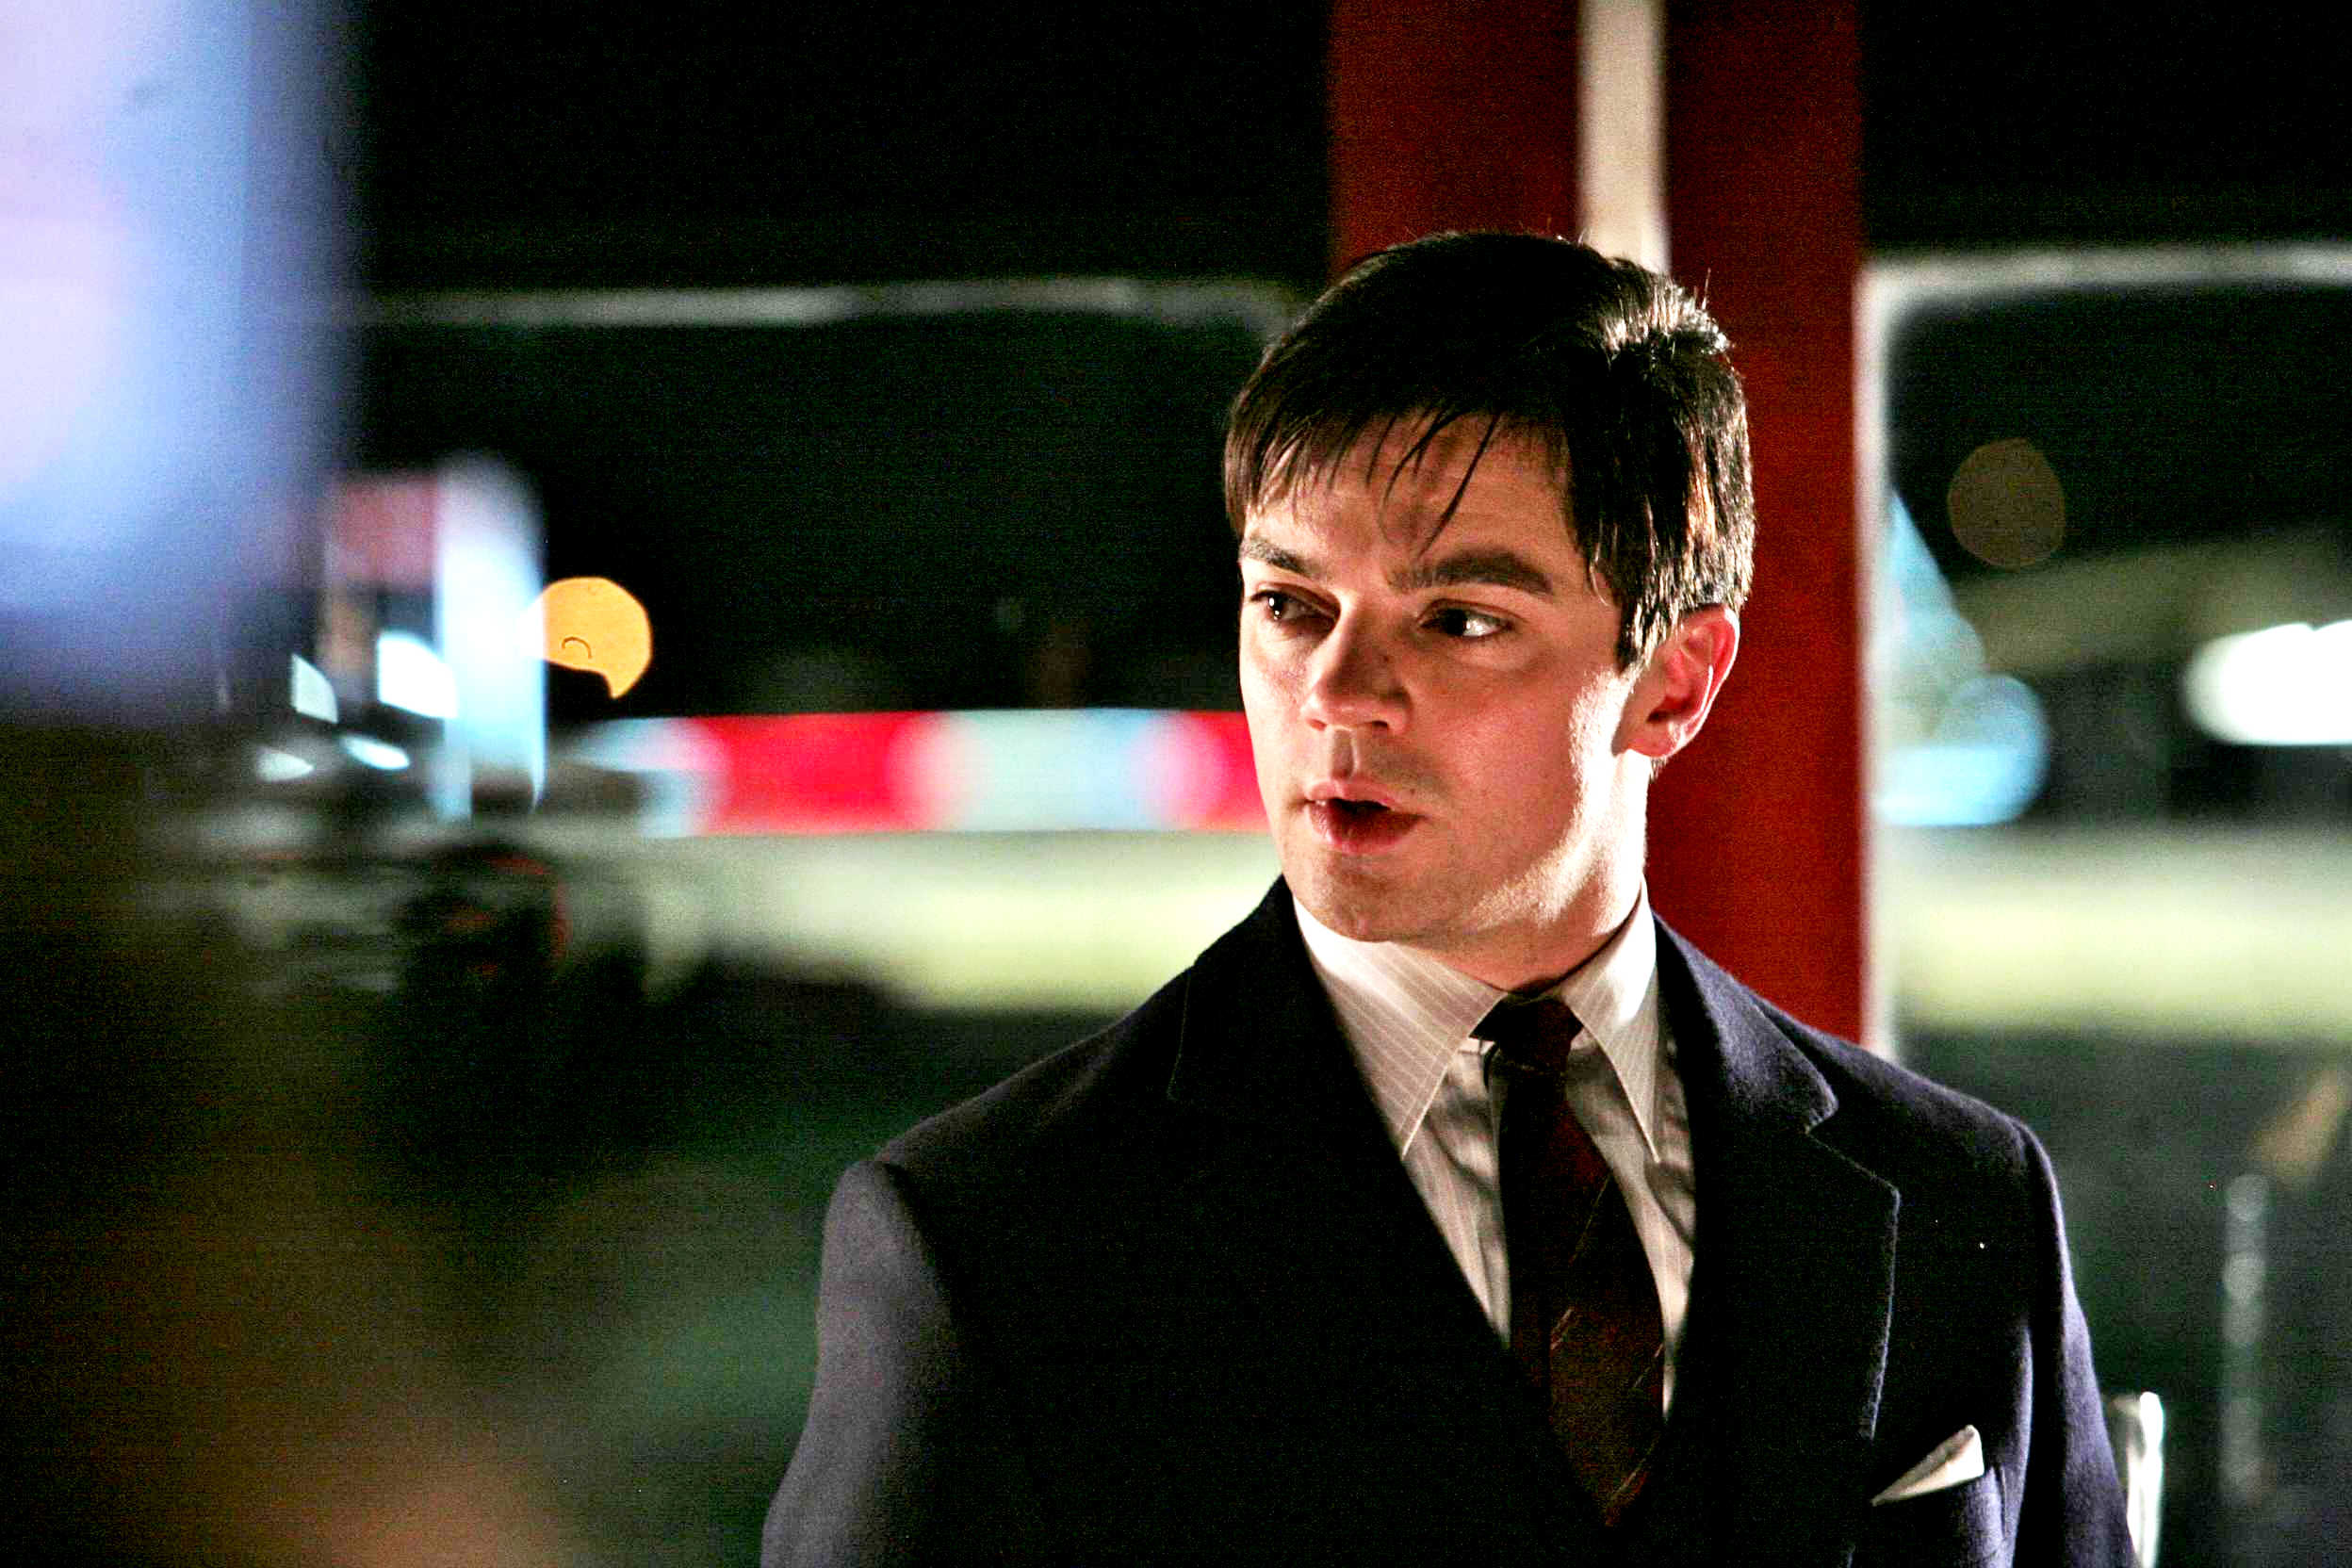 Dominic Cooper stars as Danny in Sony Pictures Classics' An Education (2009). Photo credit by Kerry Brown.